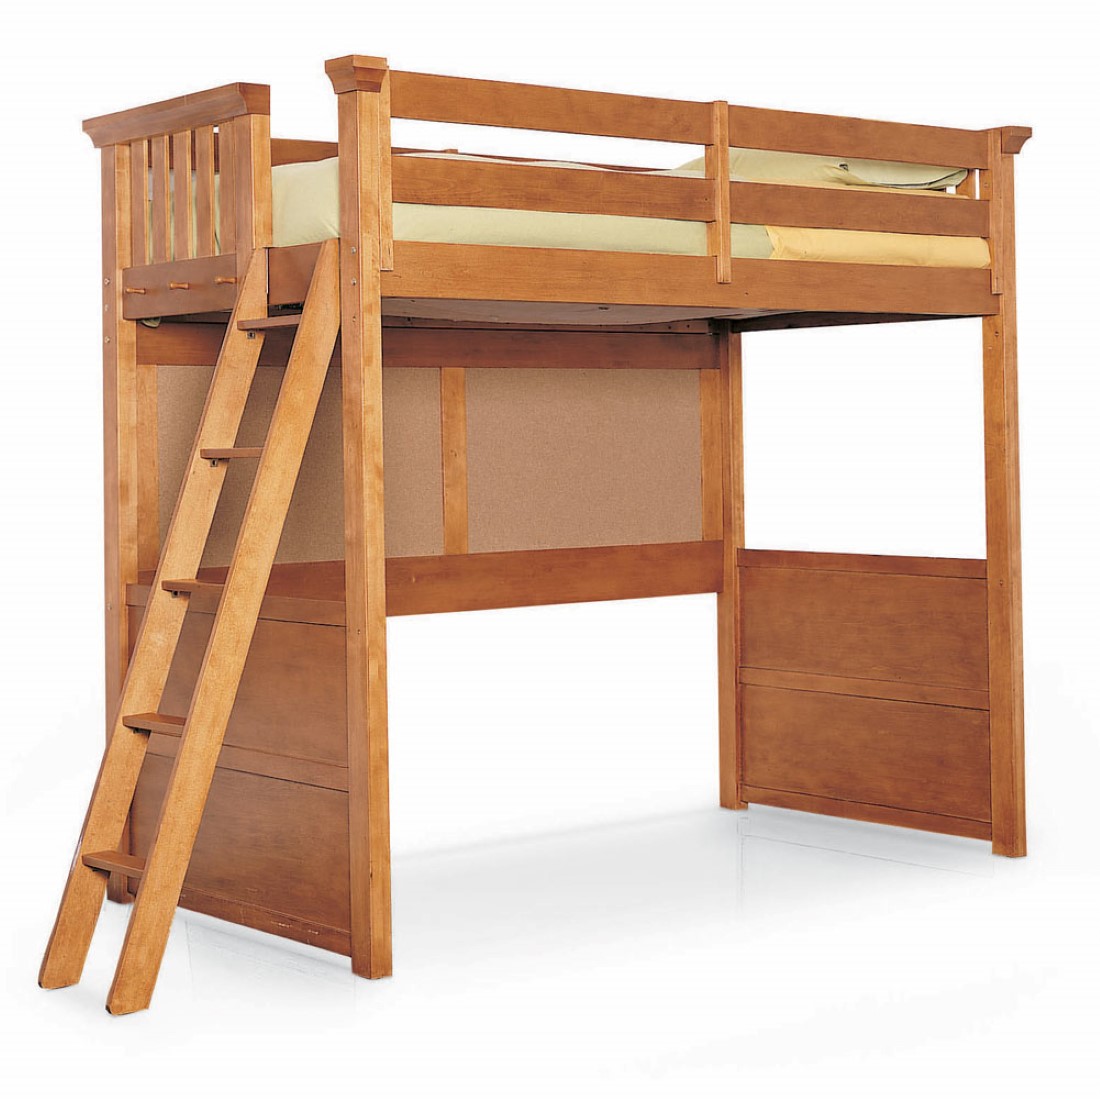 Wood Twin Design Impressive Wood Twin Loft Bed Design With Traditional Stairs And Cozy Bed Ideas Kids Room 30 Functional Twin Loft Bed Design Furniture With Desk For Kids